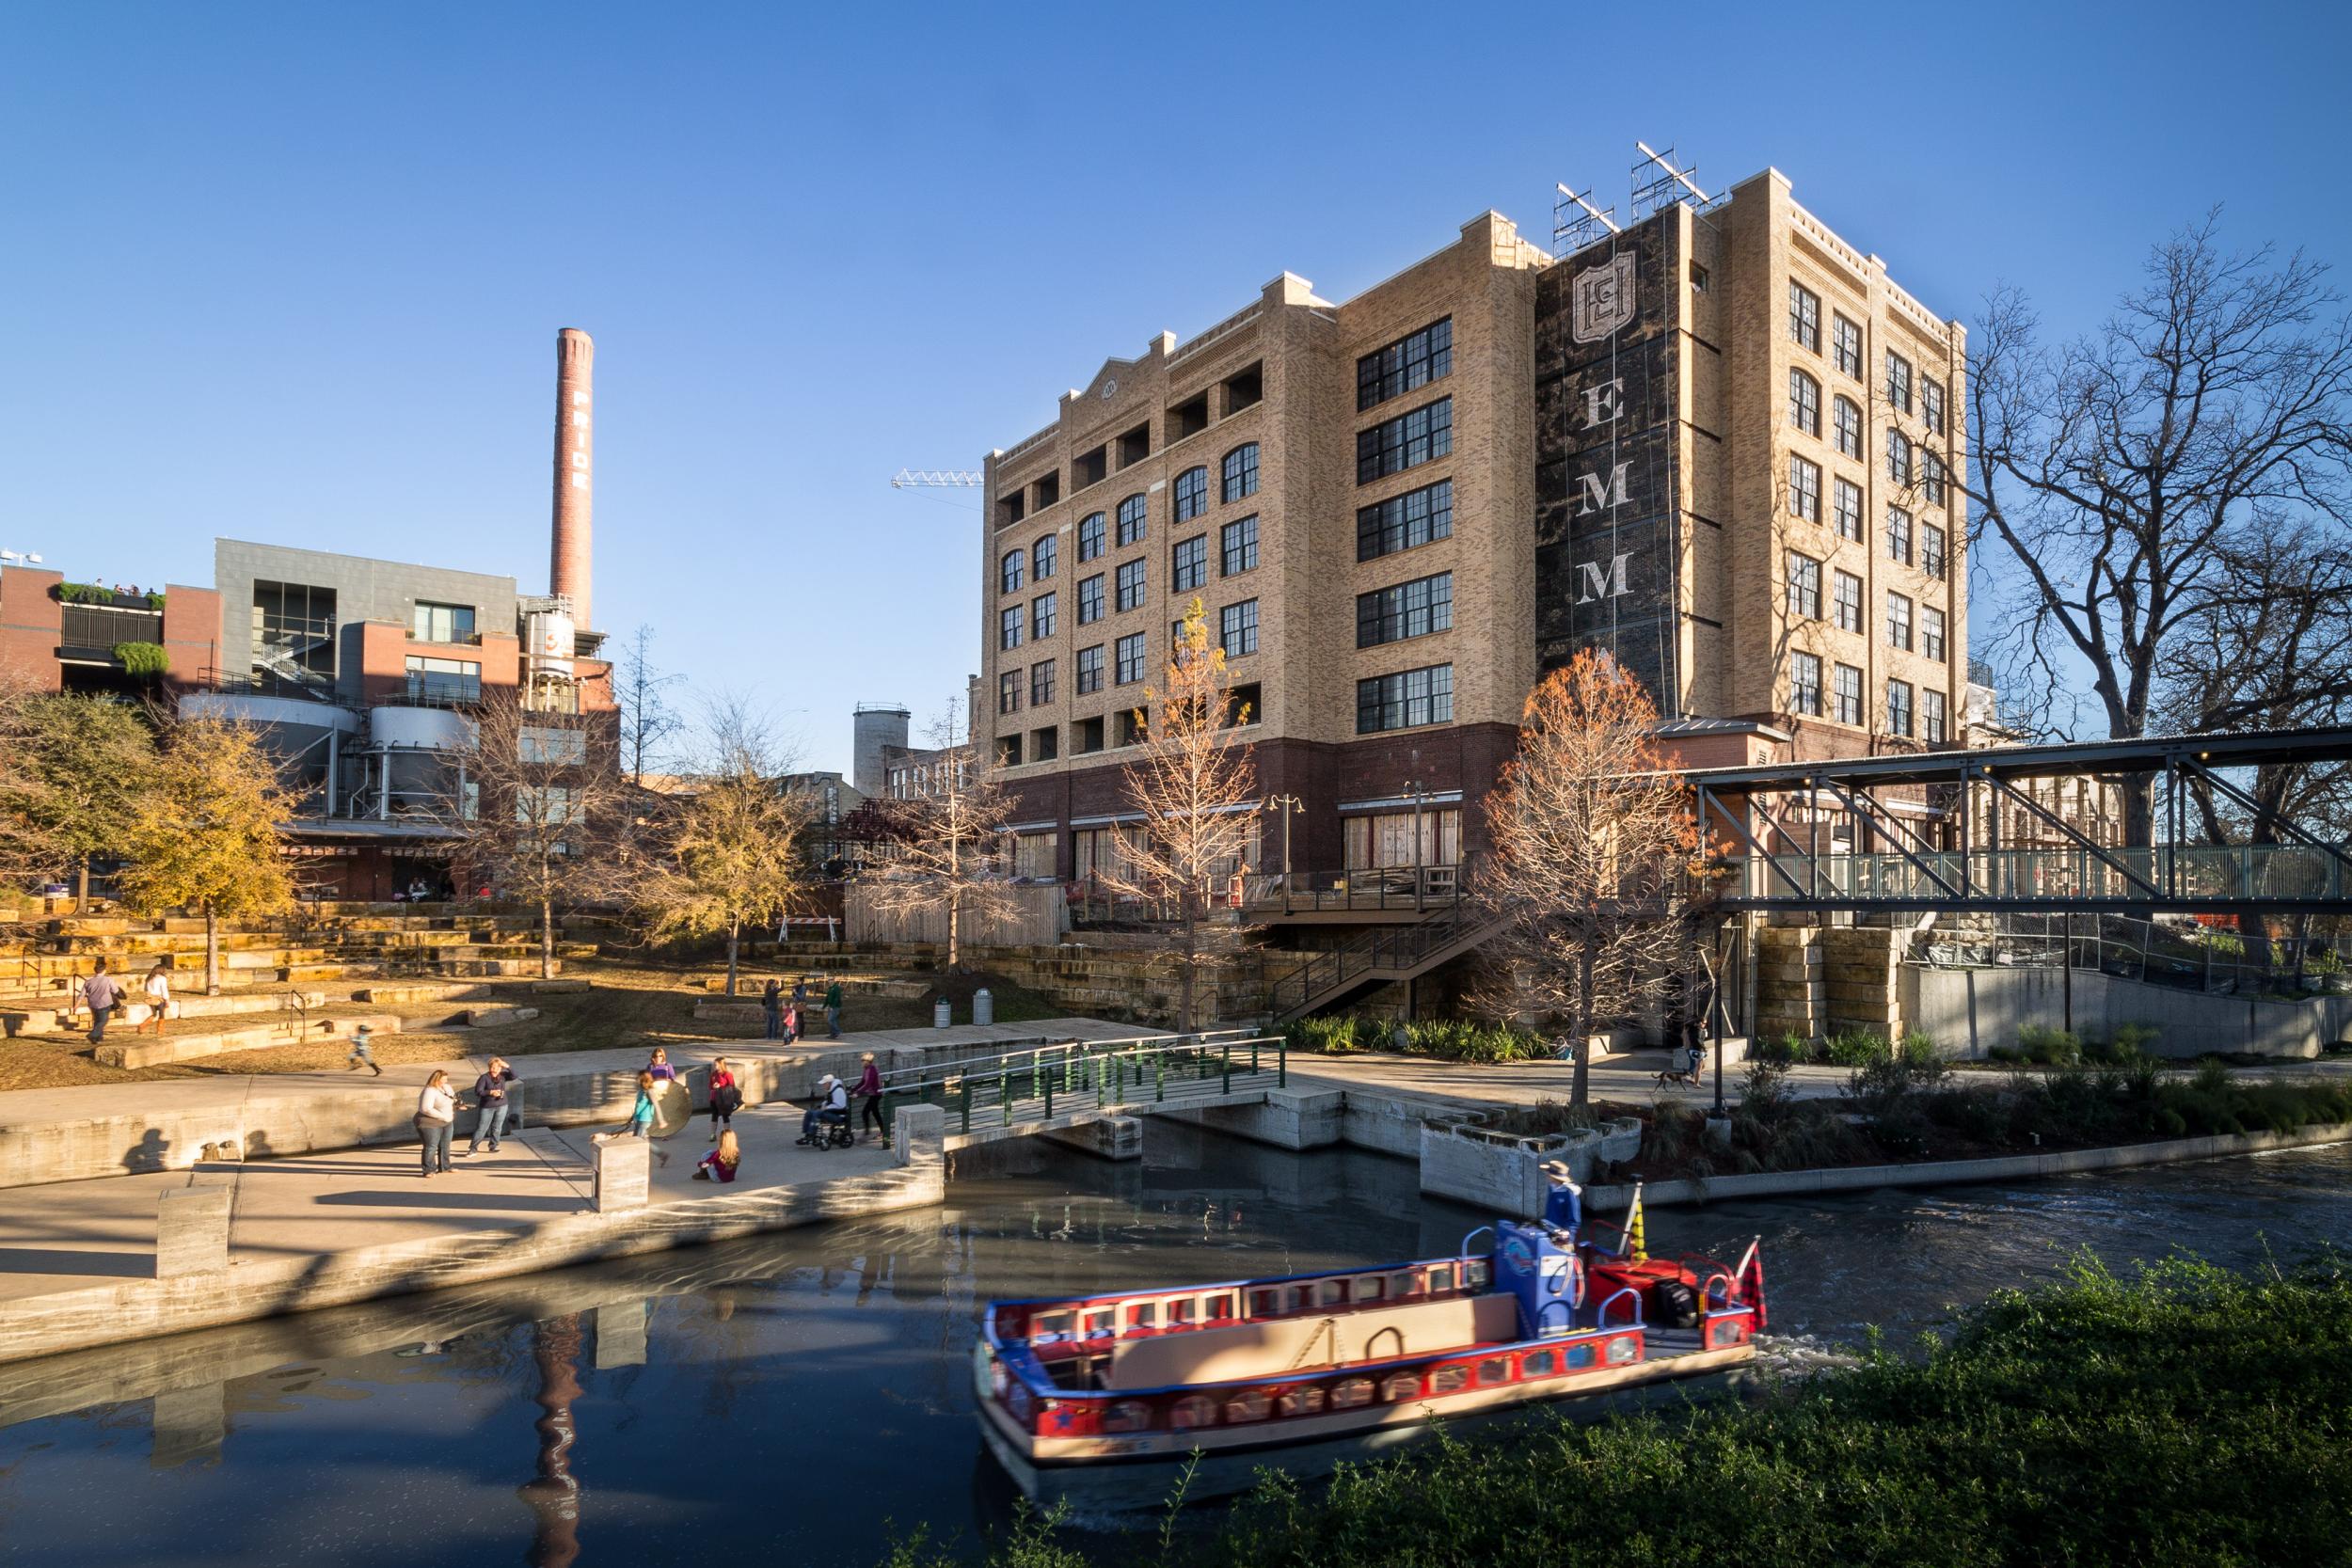 Give your feet a rest with a cruise down the San Antonio river